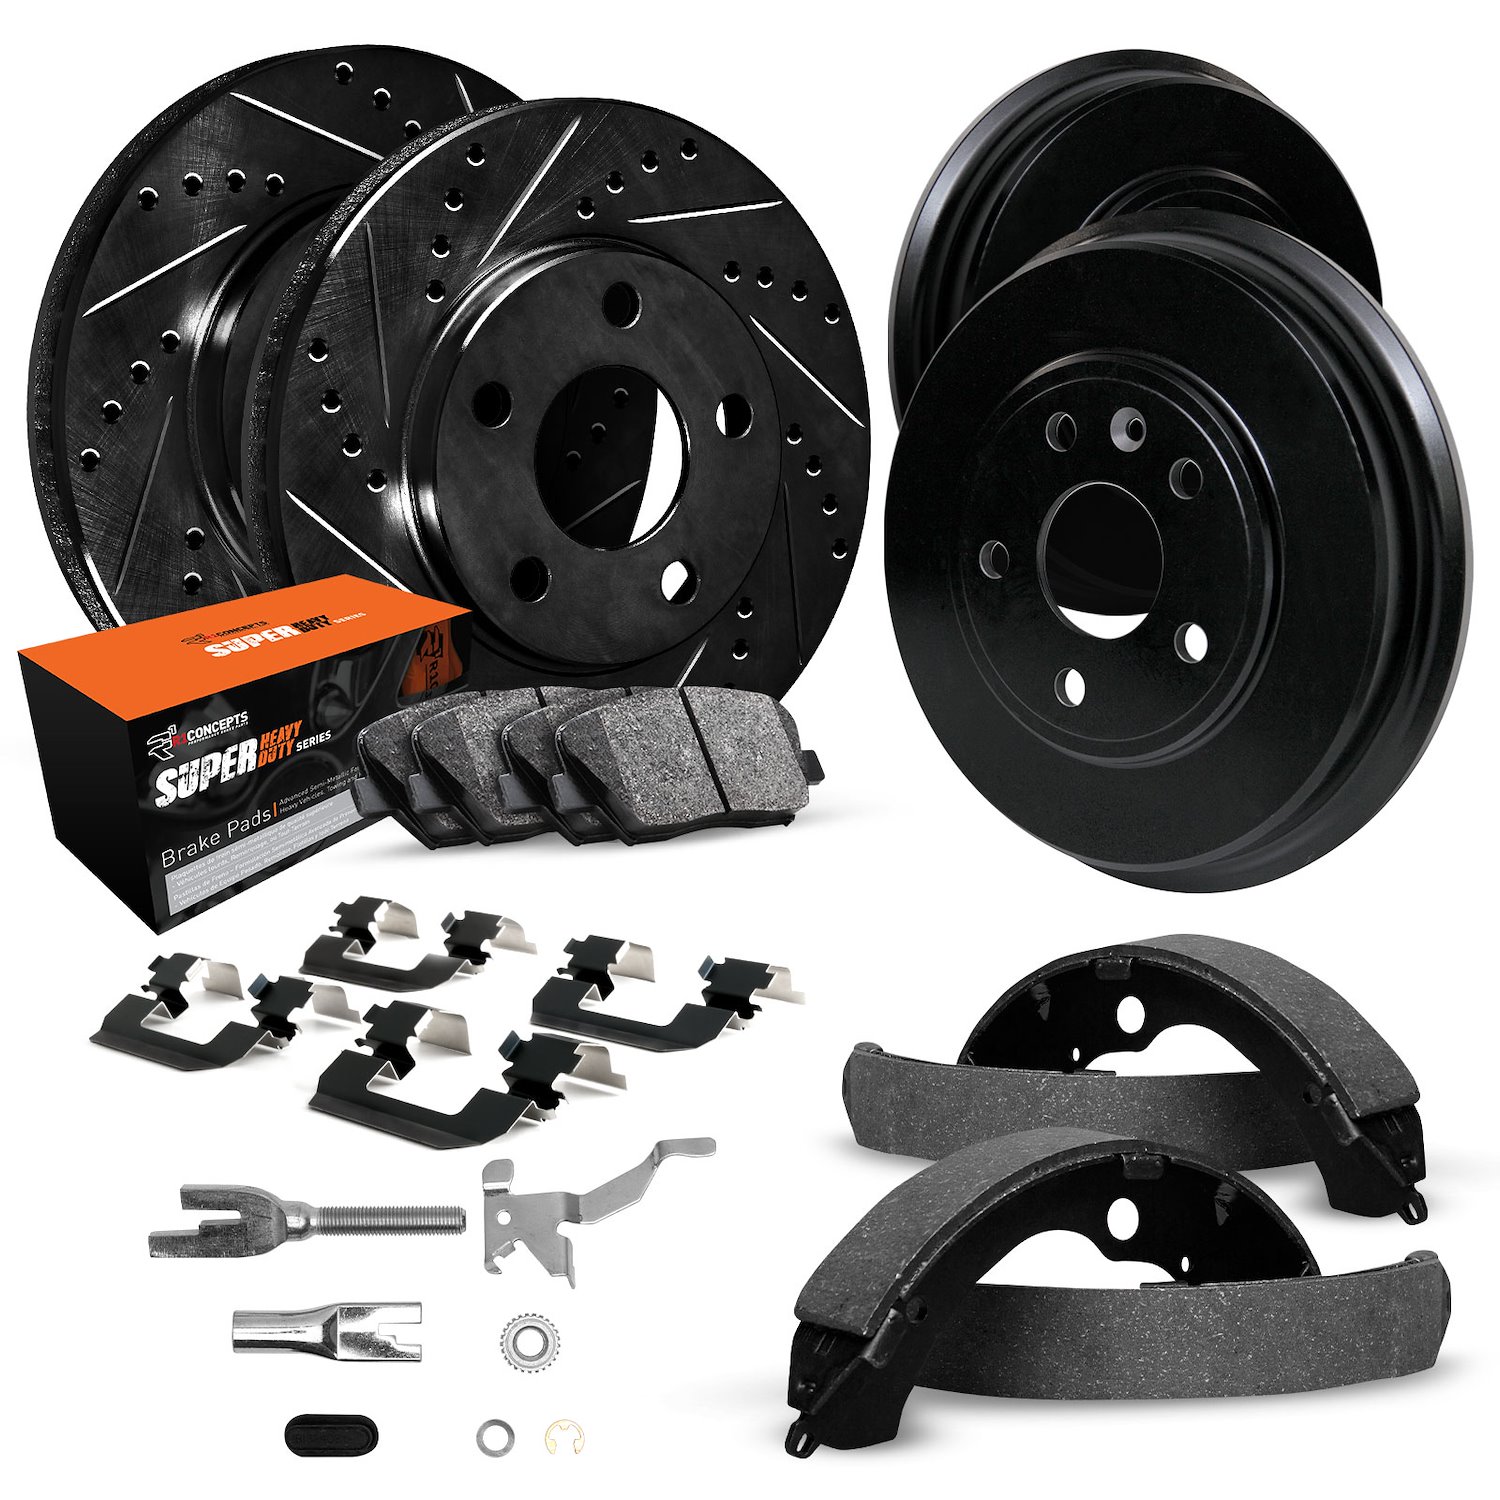 E-Line Slotted Black Brake Rotor & Drum Set w/Super-Duty Pads, Shoes, Hardware/Adjusters, 1975-1980 Ford/Lincoln/Mercury/Mazda